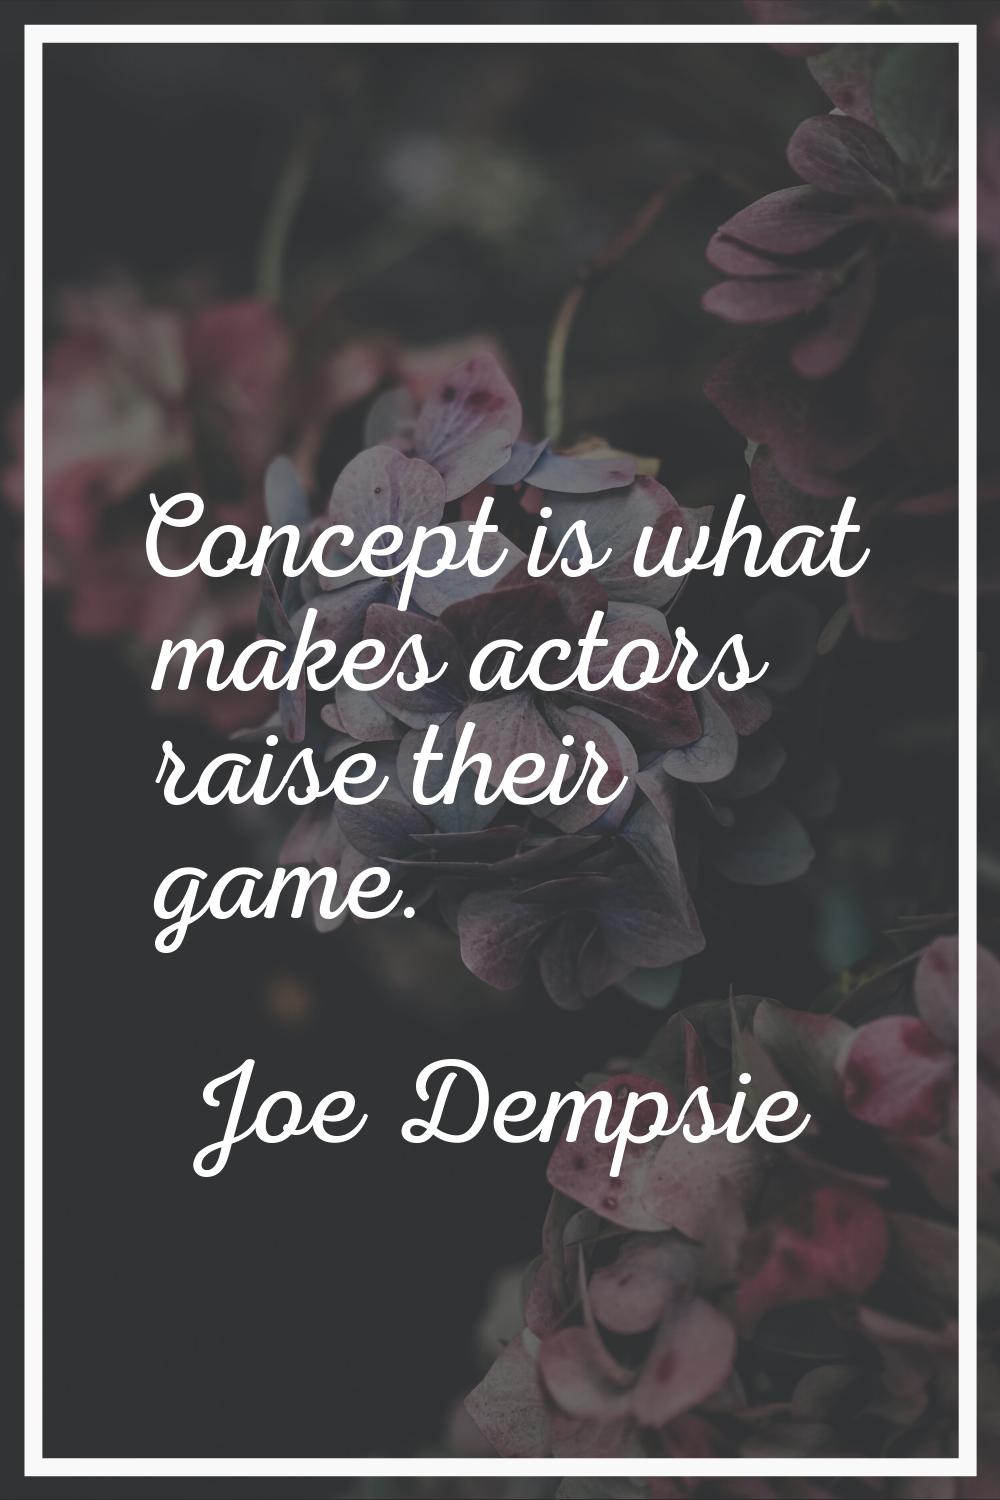 Concept is what makes actors raise their game.